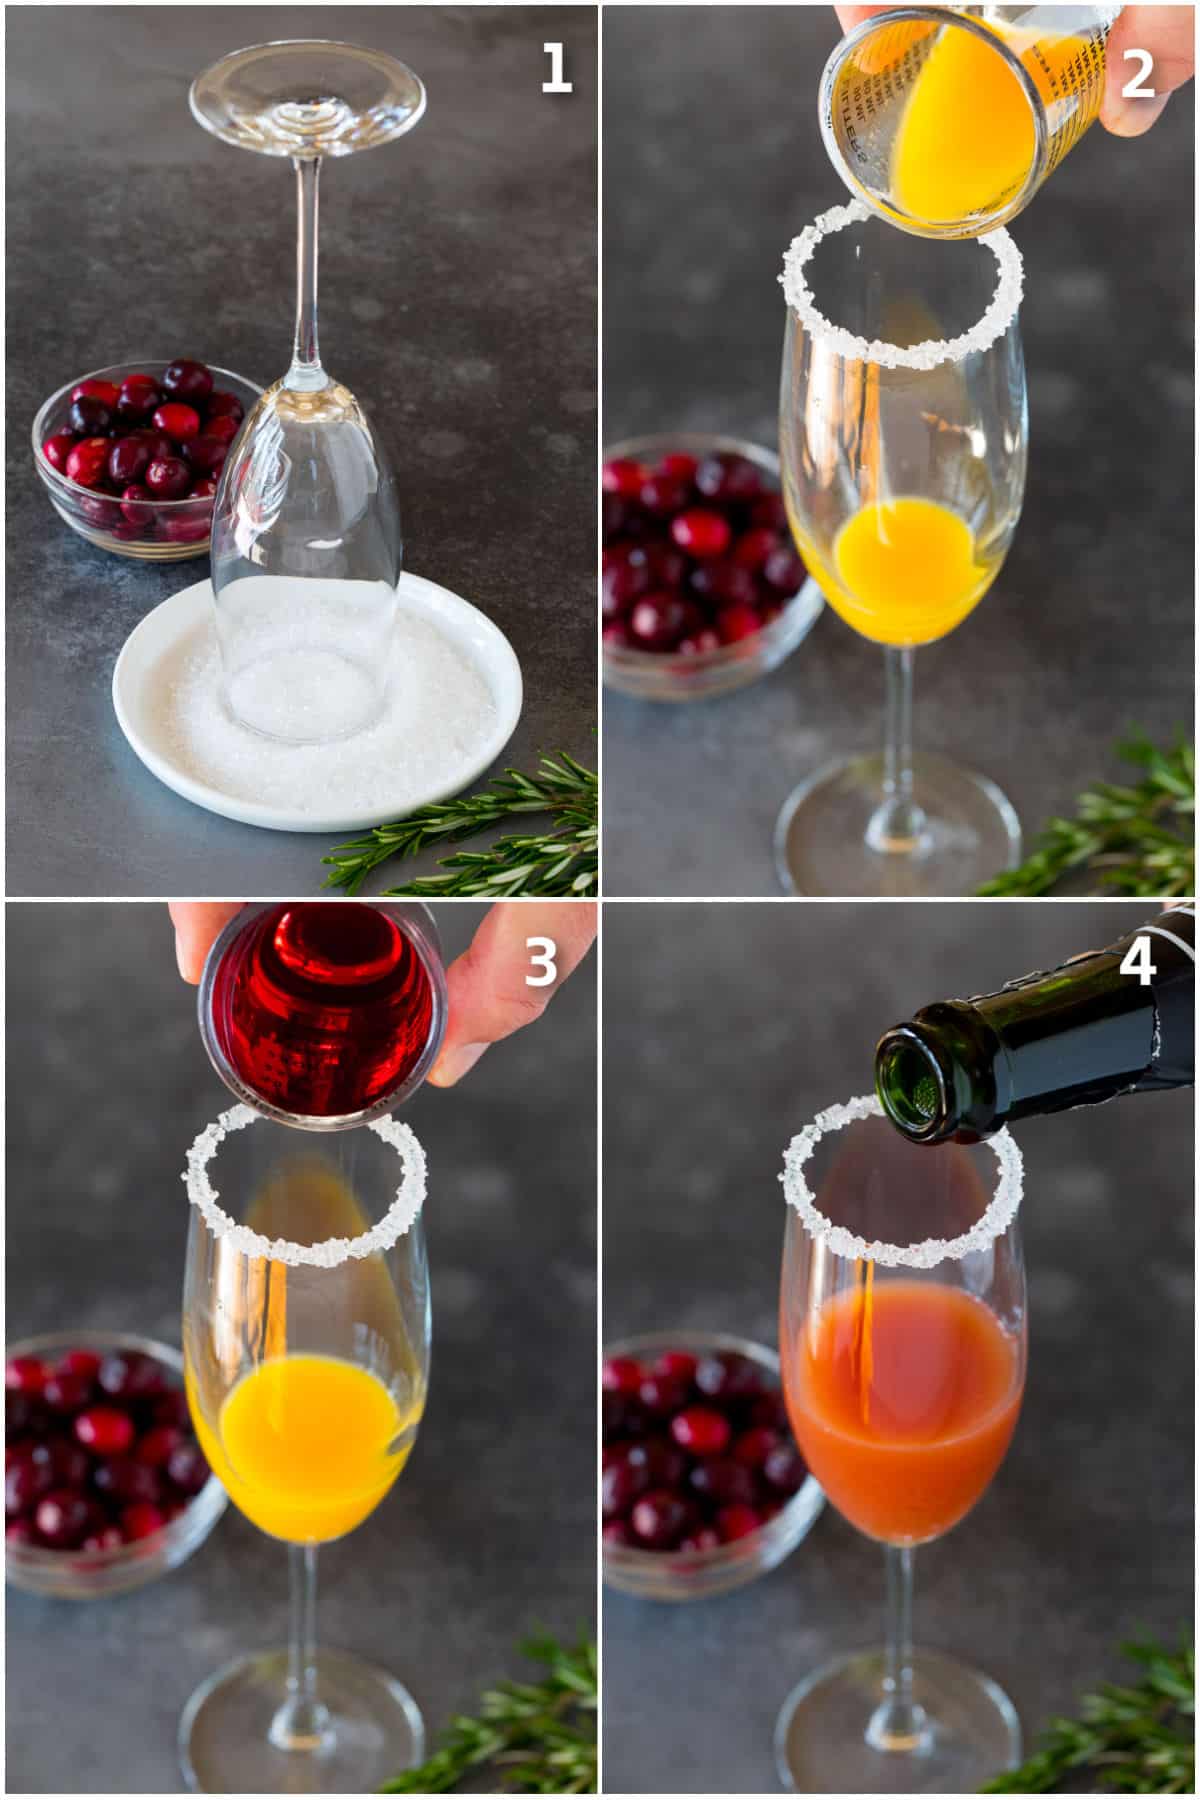 A champagne glass rim coated in sugar, and juices and champagne being poured into the glass.